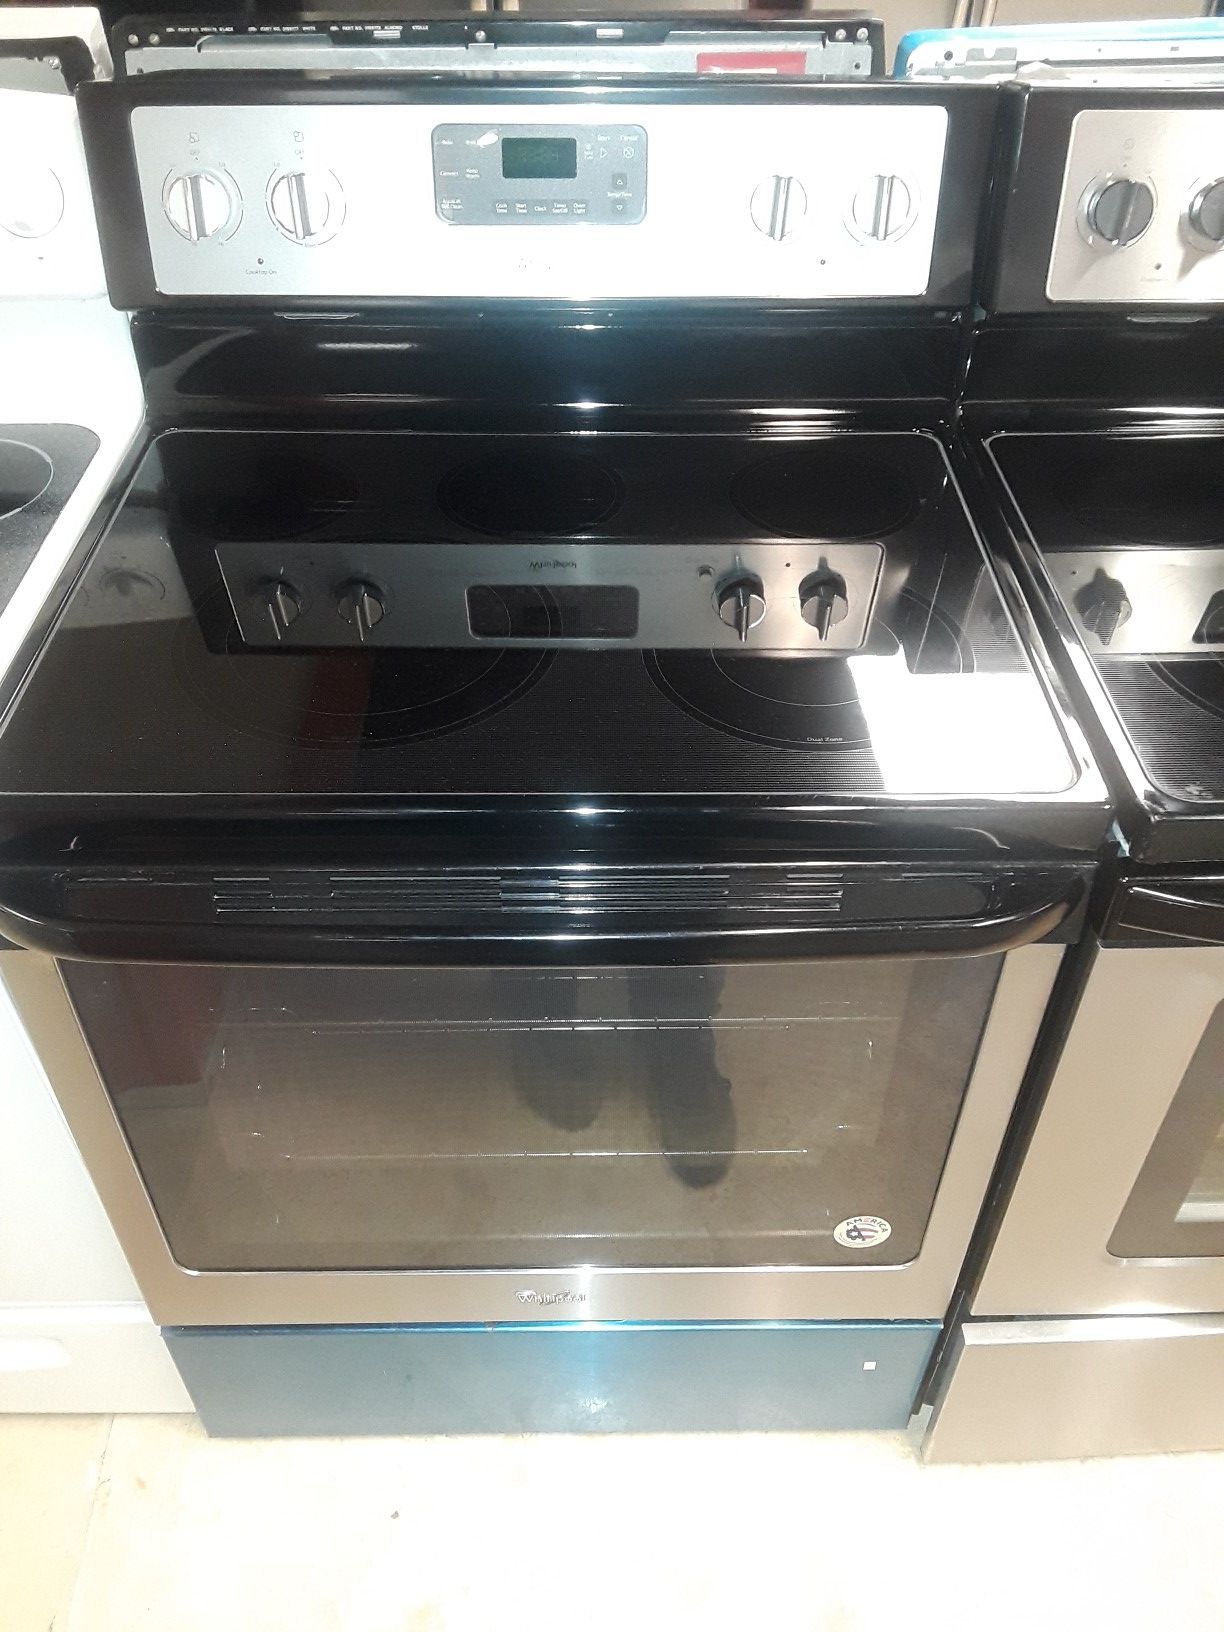 Whirlpool new scratch and dent stove